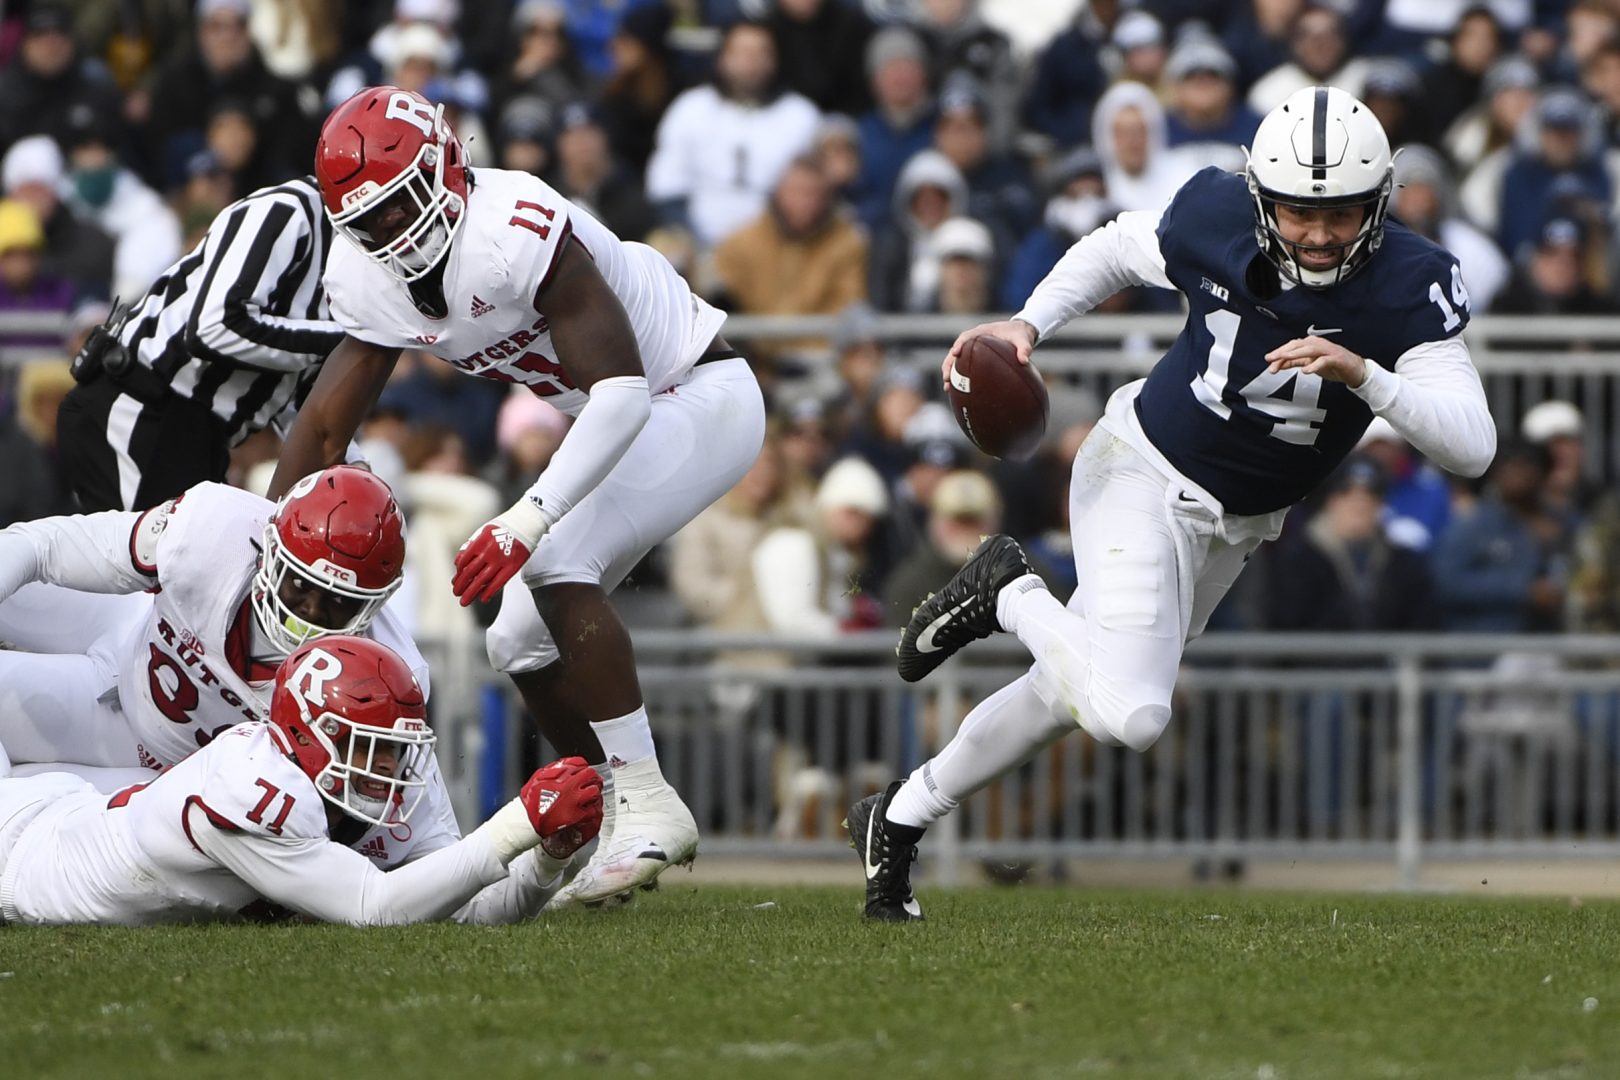 Rutgers defensive lineman Aaron Lewis (71) tries to tackle Penn State quarterback Sean Clifford (14) during the first half of an NCAA college football game in State College, Pa., Saturday, Nov. 20, 2021. (AP Photo/Barry Reeger)